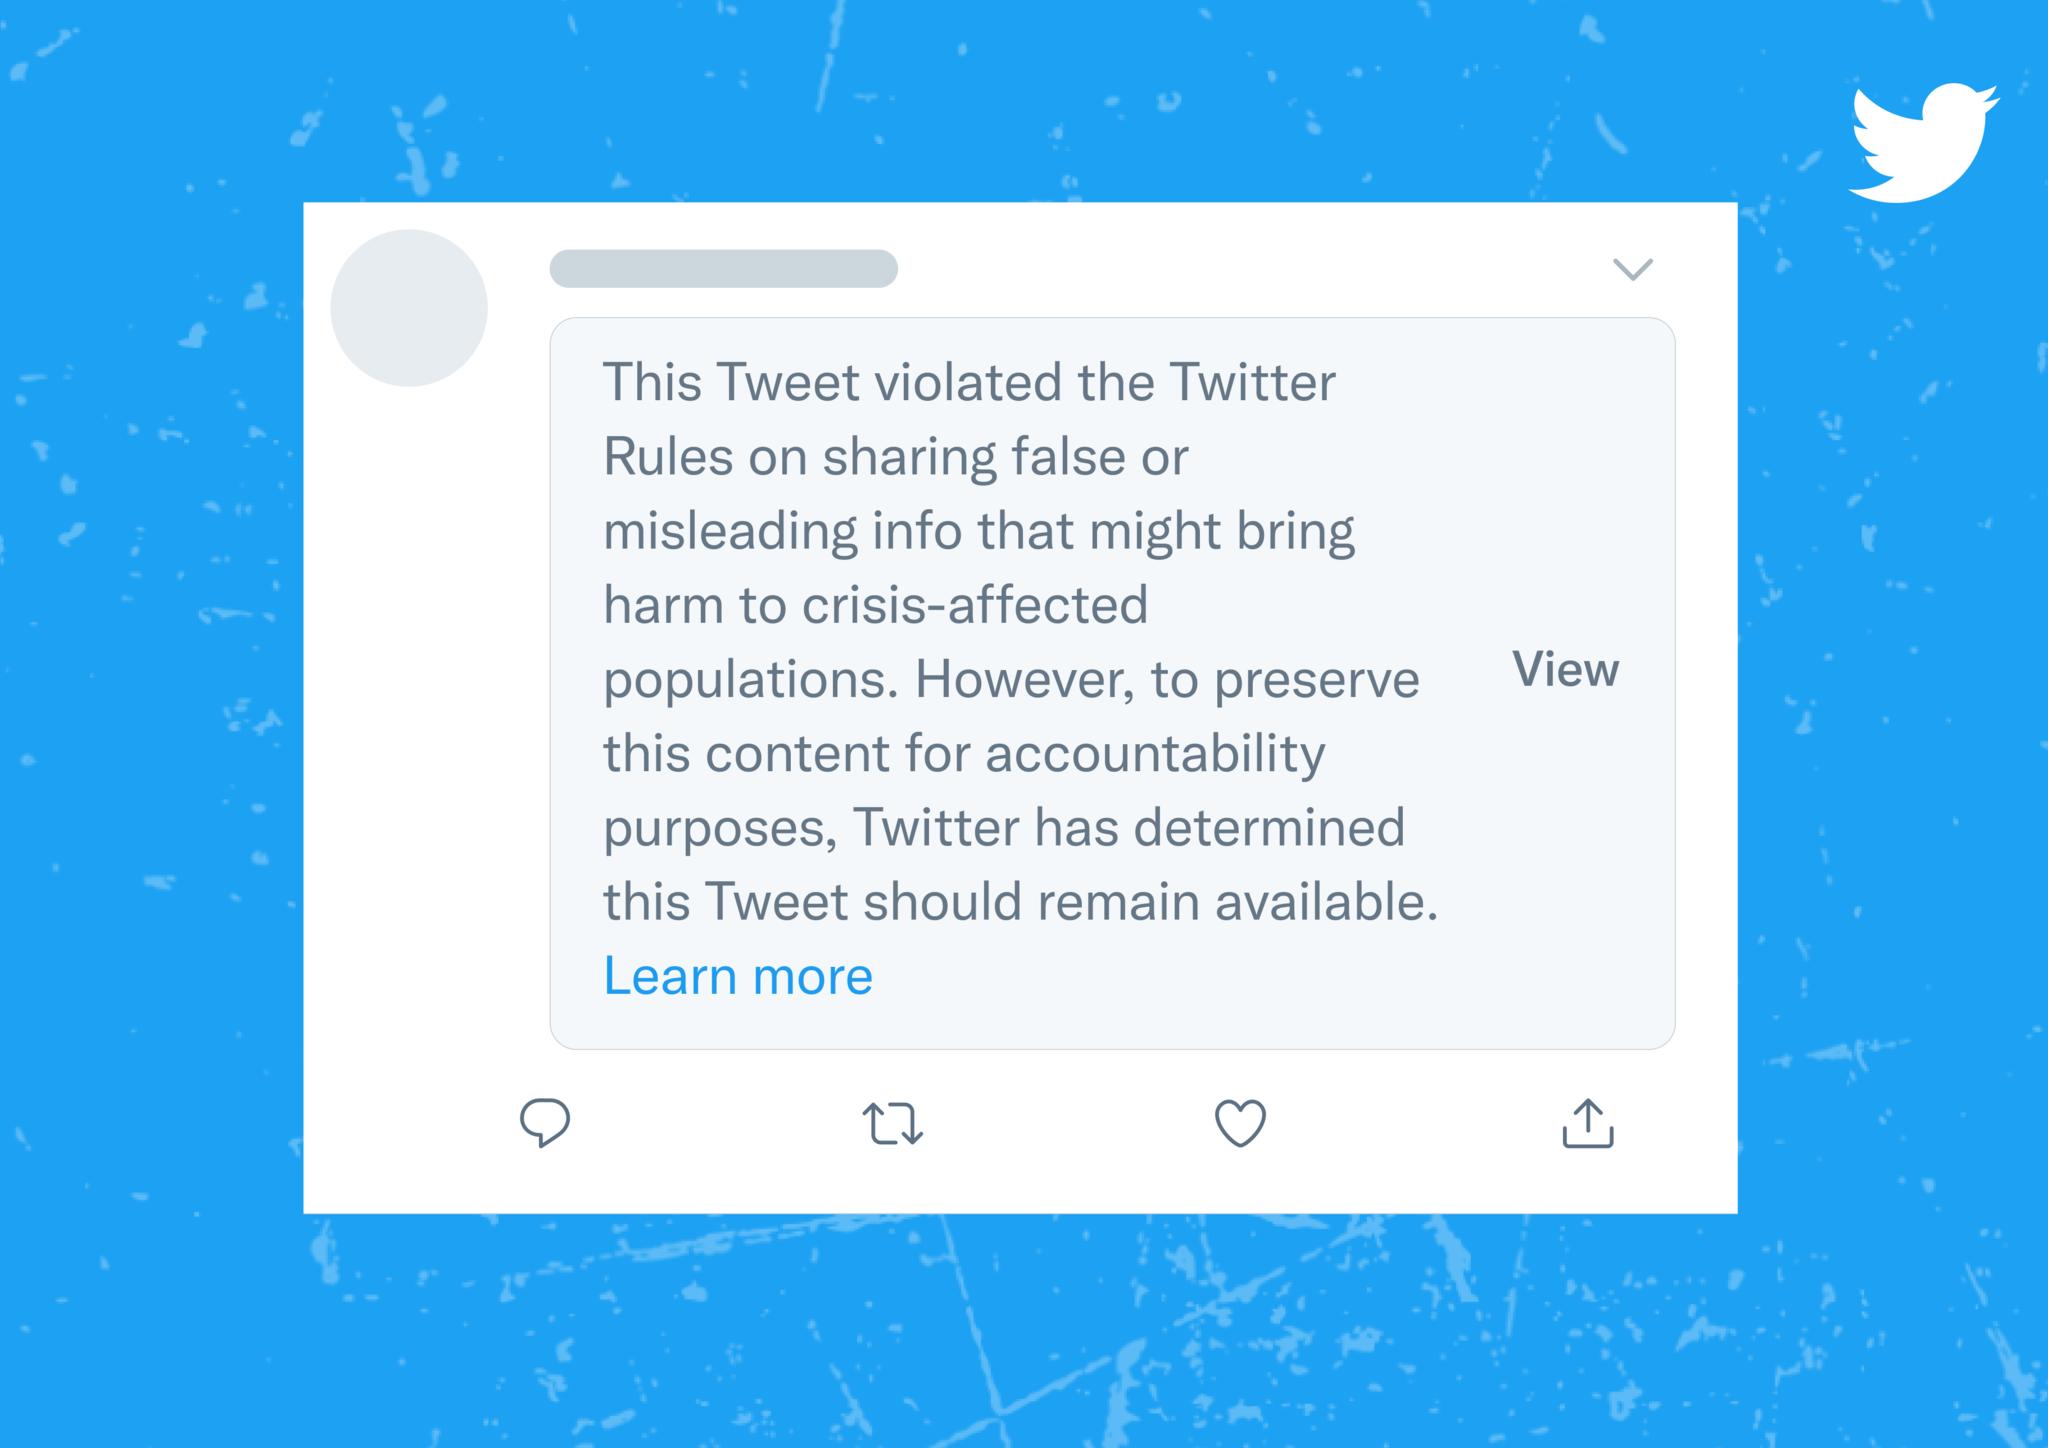 Twitter outlines a new crisis misinformation policy to deal with fake news